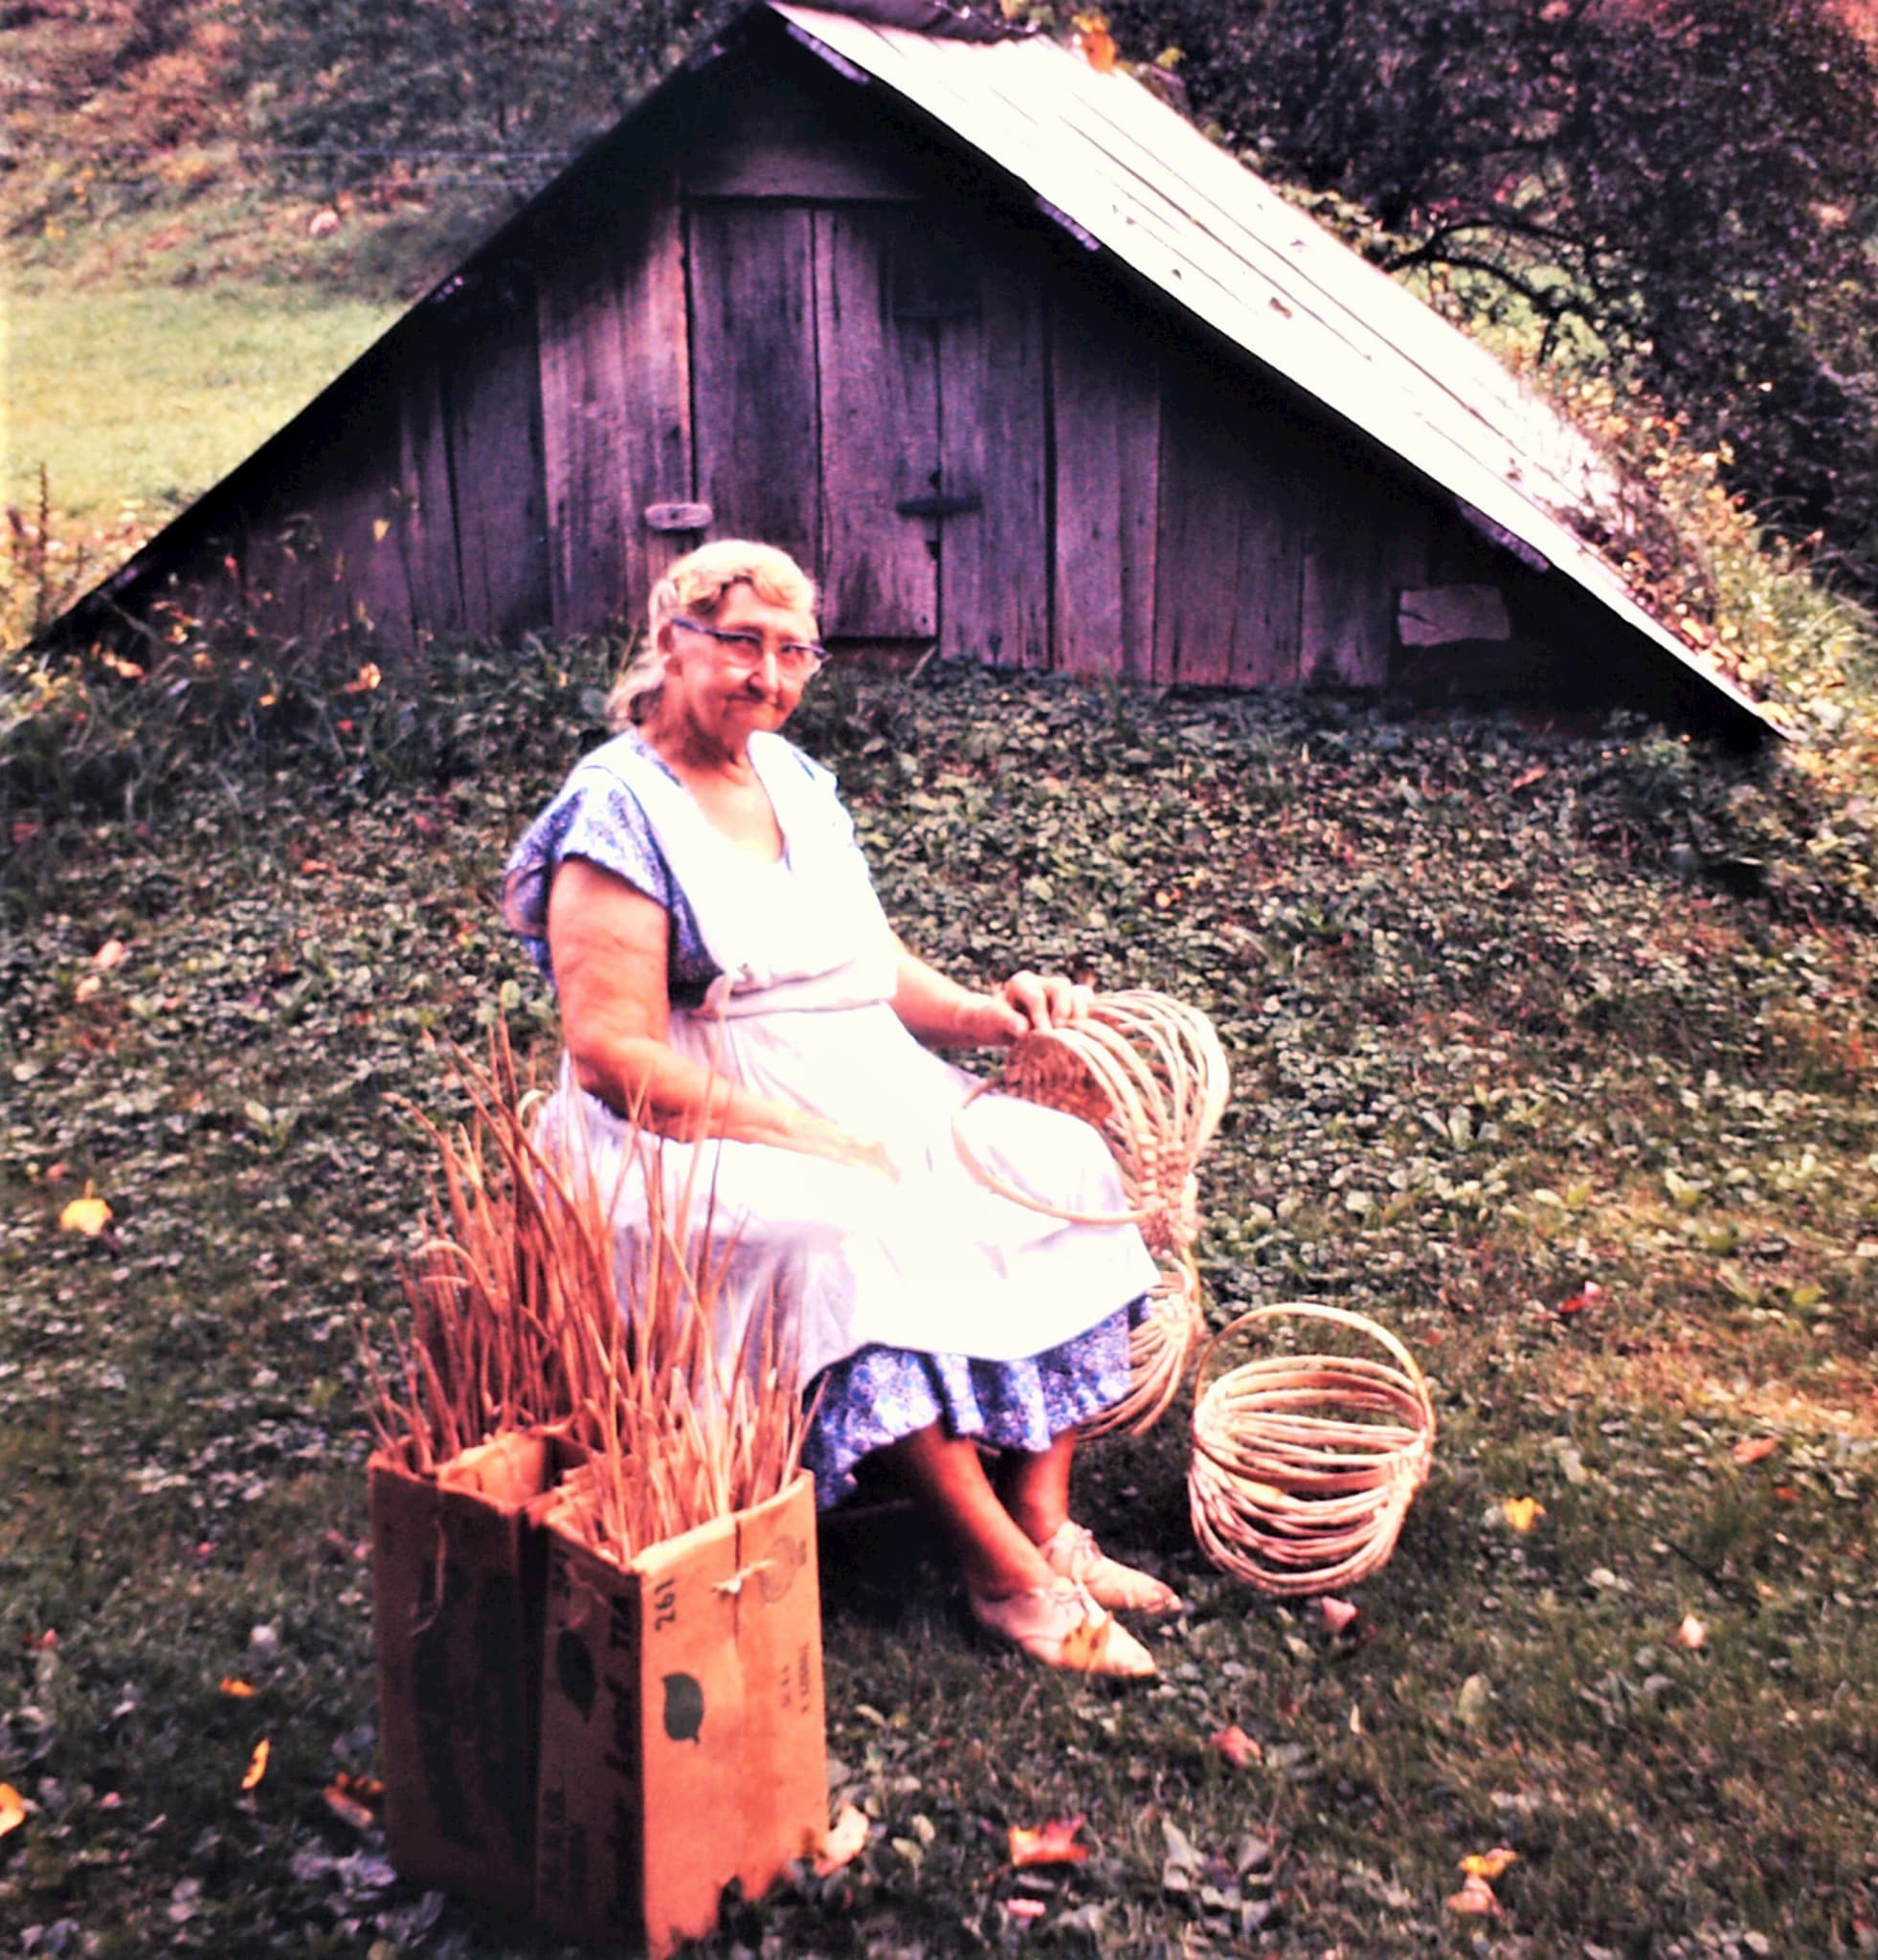 Islands in the Land Exhibition, Appalachia, West Virginia, Lucy Lucky